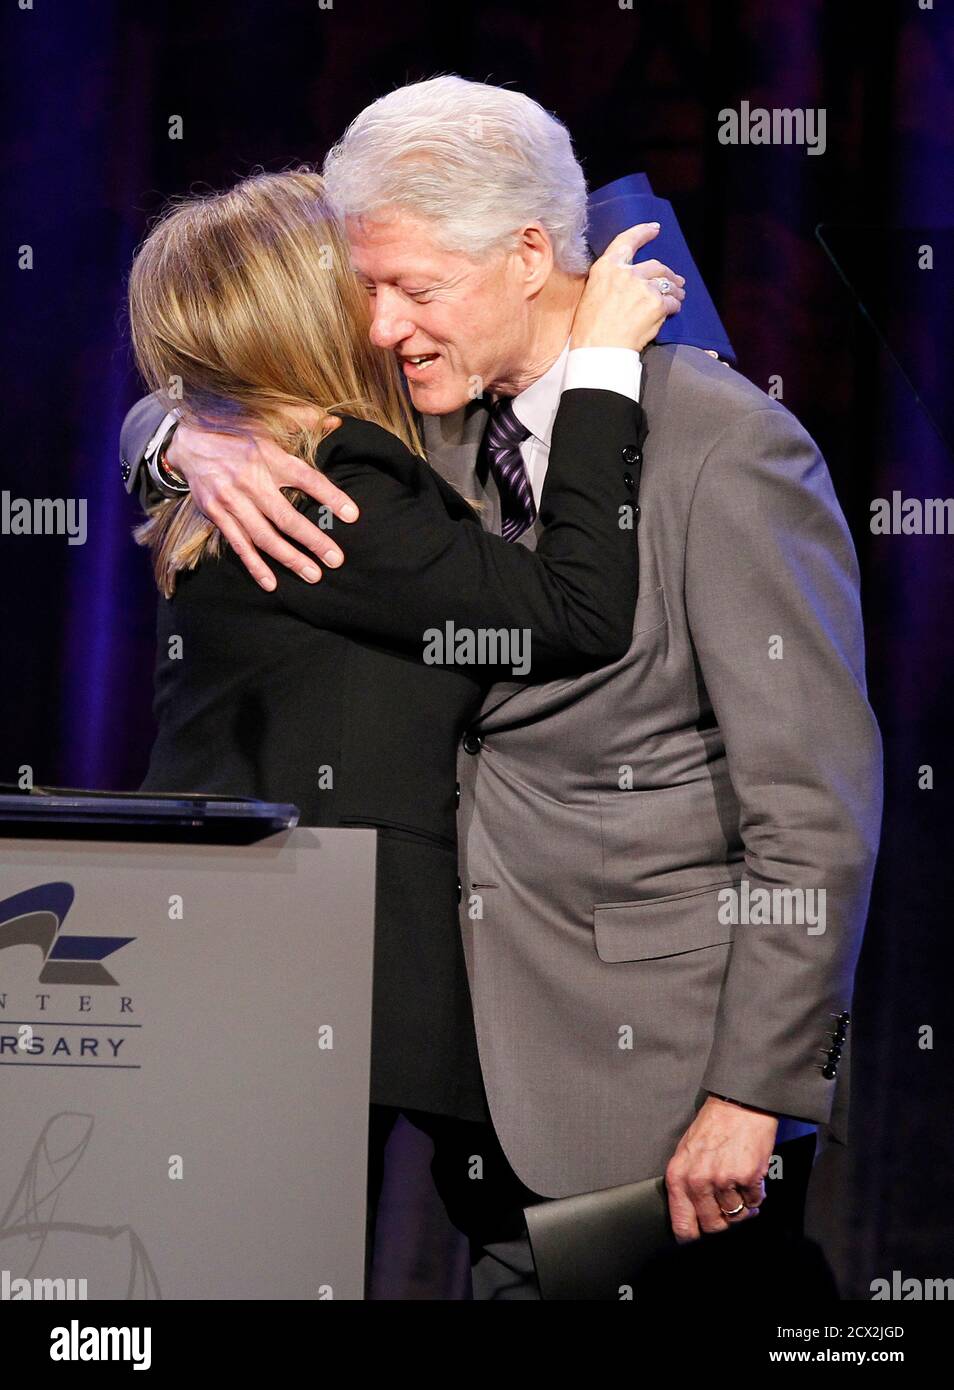 Singer and actress Barbra Streisand embraces former U.S. President Bill  Clinton as she presents him with the 2011 William O. Douglas award at the  Public Counsel's 40th anniversary event in Beverly Hills,